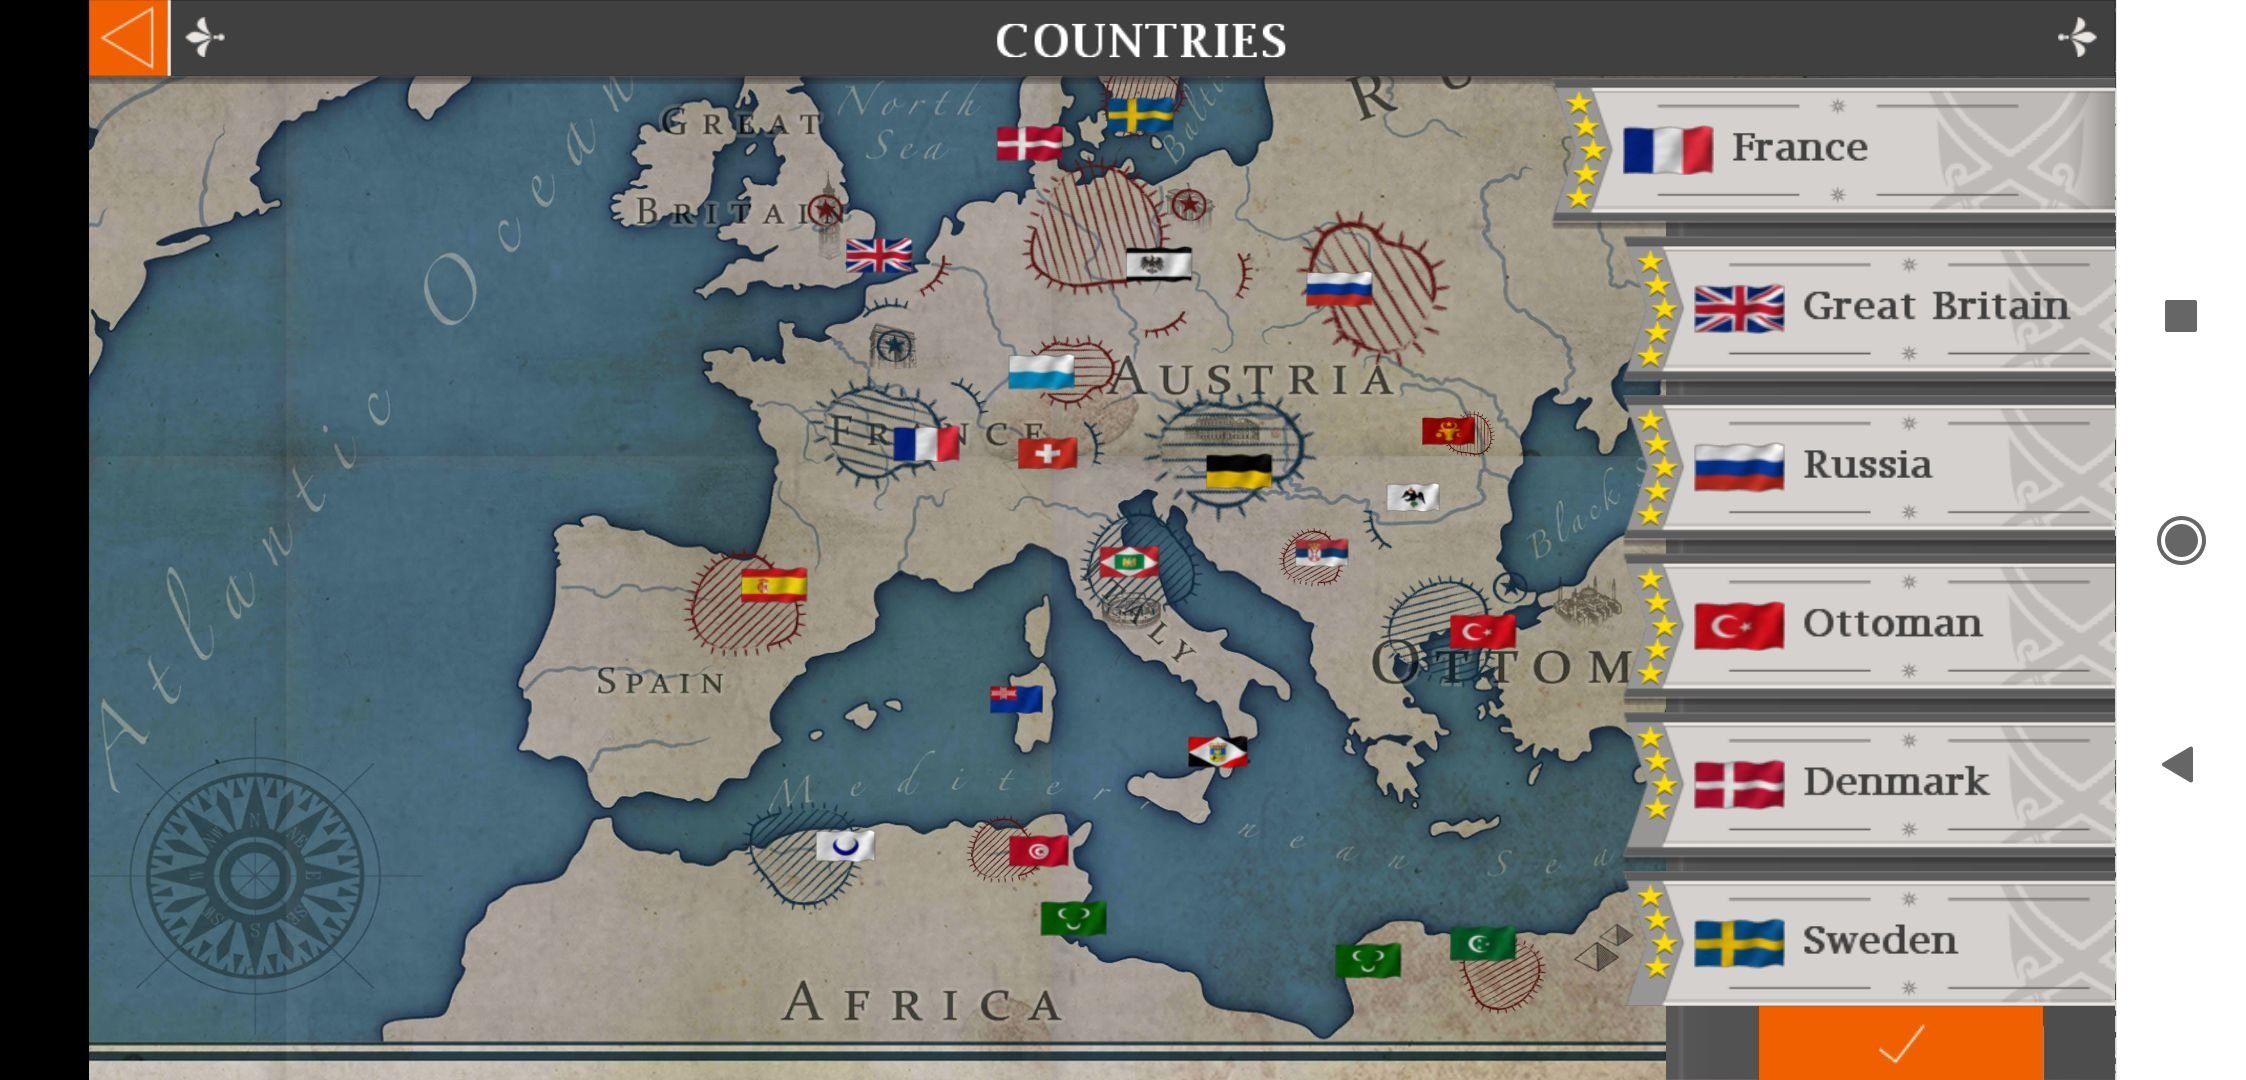 European War 7: Medieval instal the new version for android